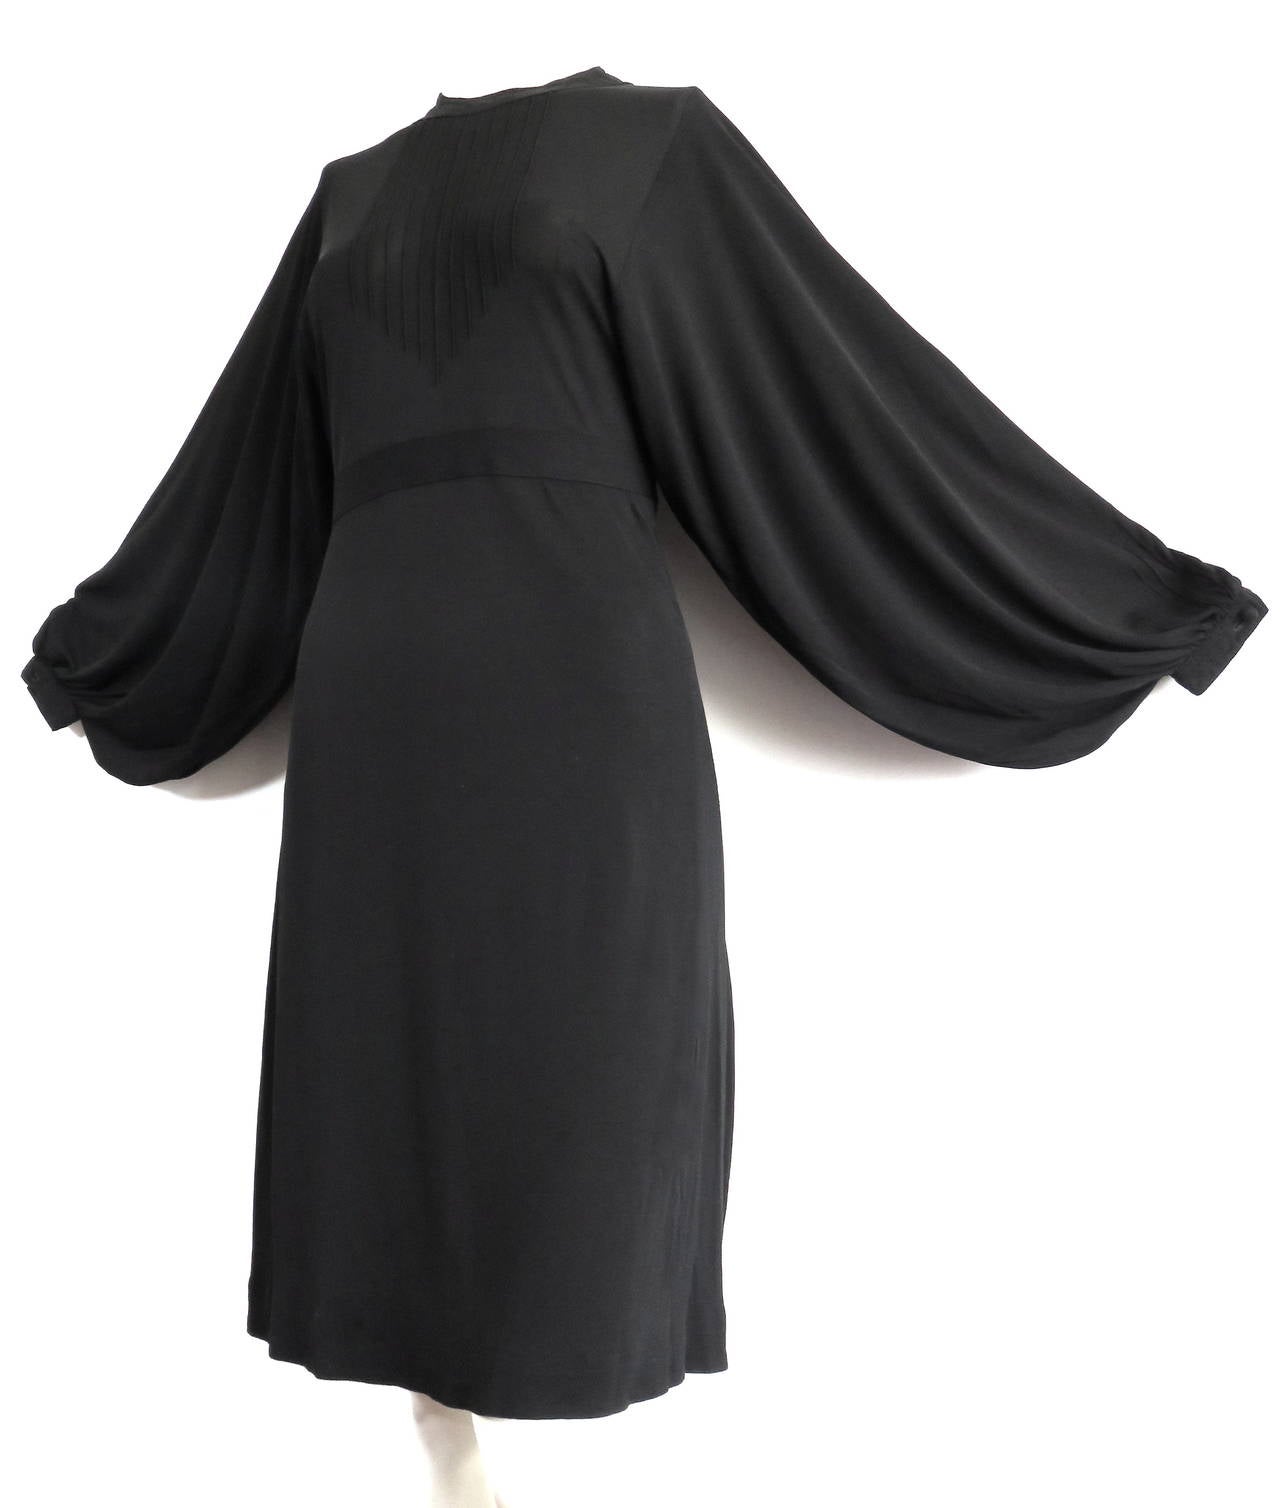 Excellent condition, early 1970's JEAN MUIR, Pin-tucked, matte-jersey LBD.

The dress features gorgeous, volume shaped sleeves.  The armholes of the sleeves start at the shoulder, and open all the way down to the waist, similar to a kimono sleeve